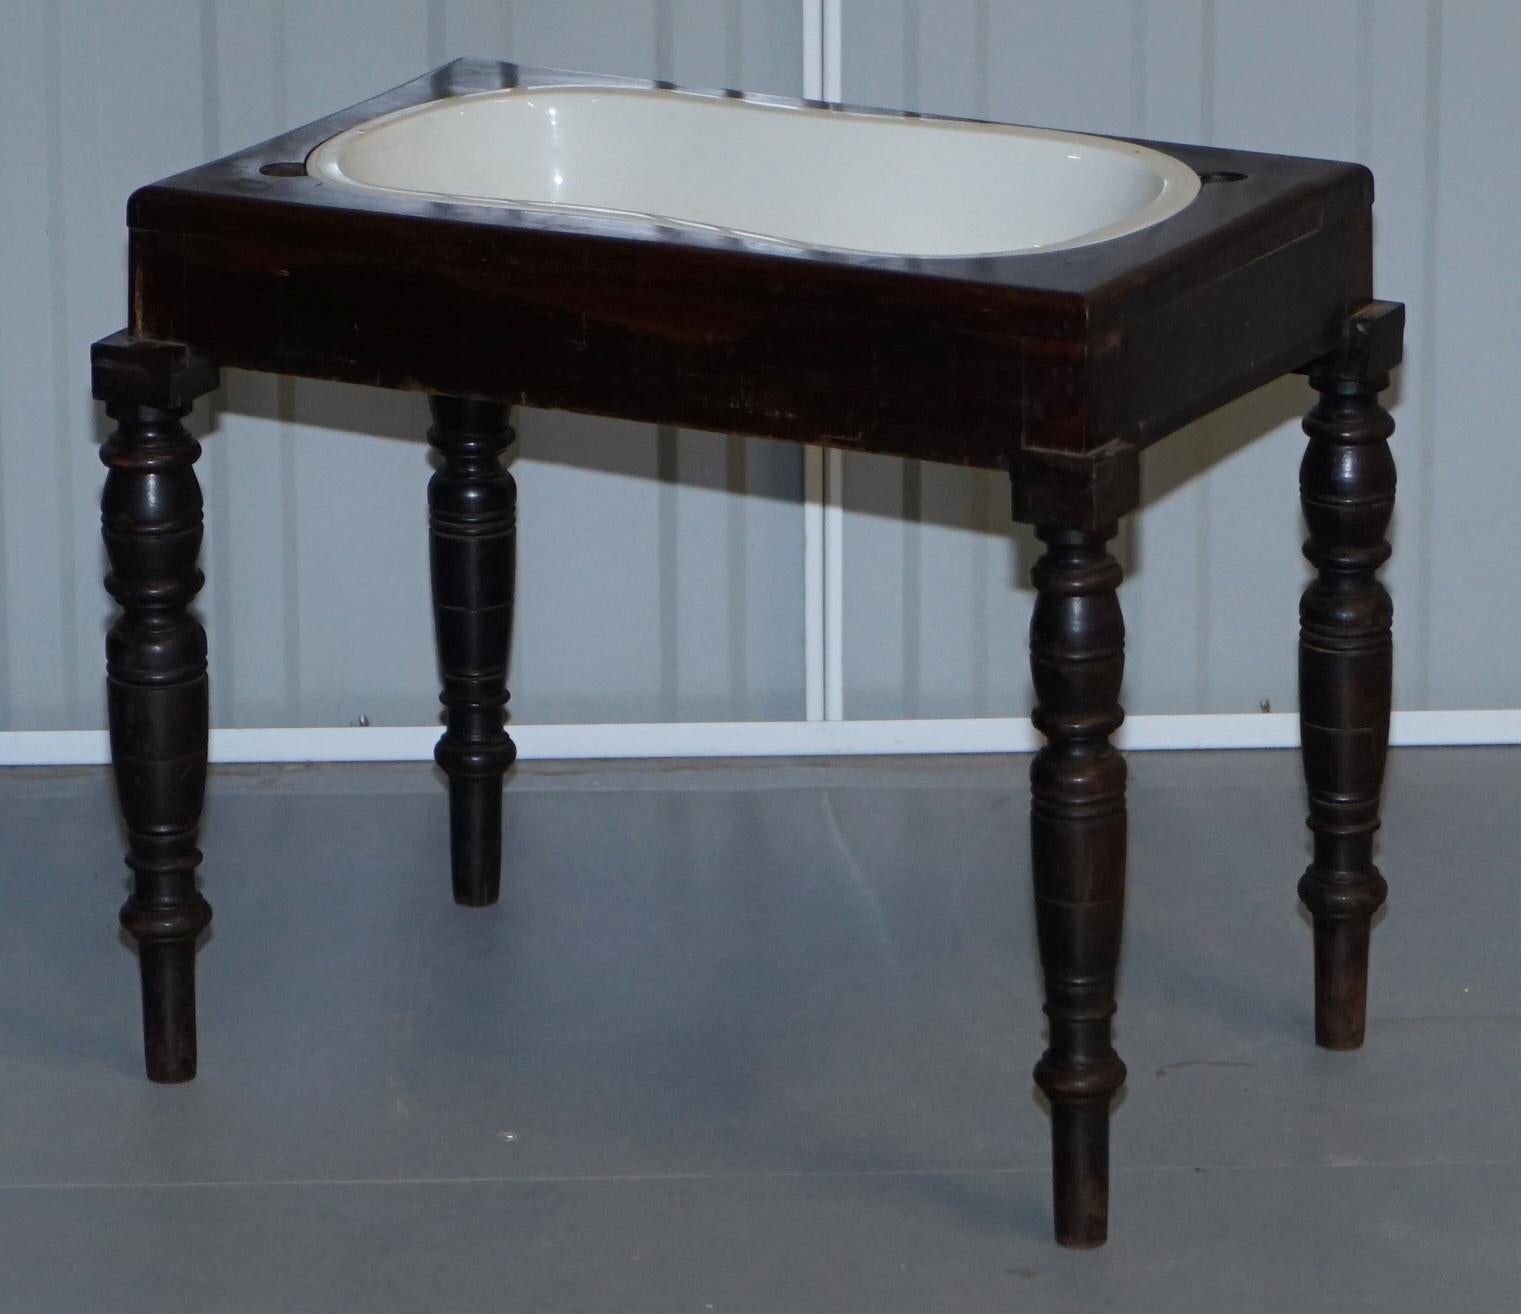 English Victorian Side Table with Ceramic Stamped Porcelain Baby or Foot Bath Wash Basin